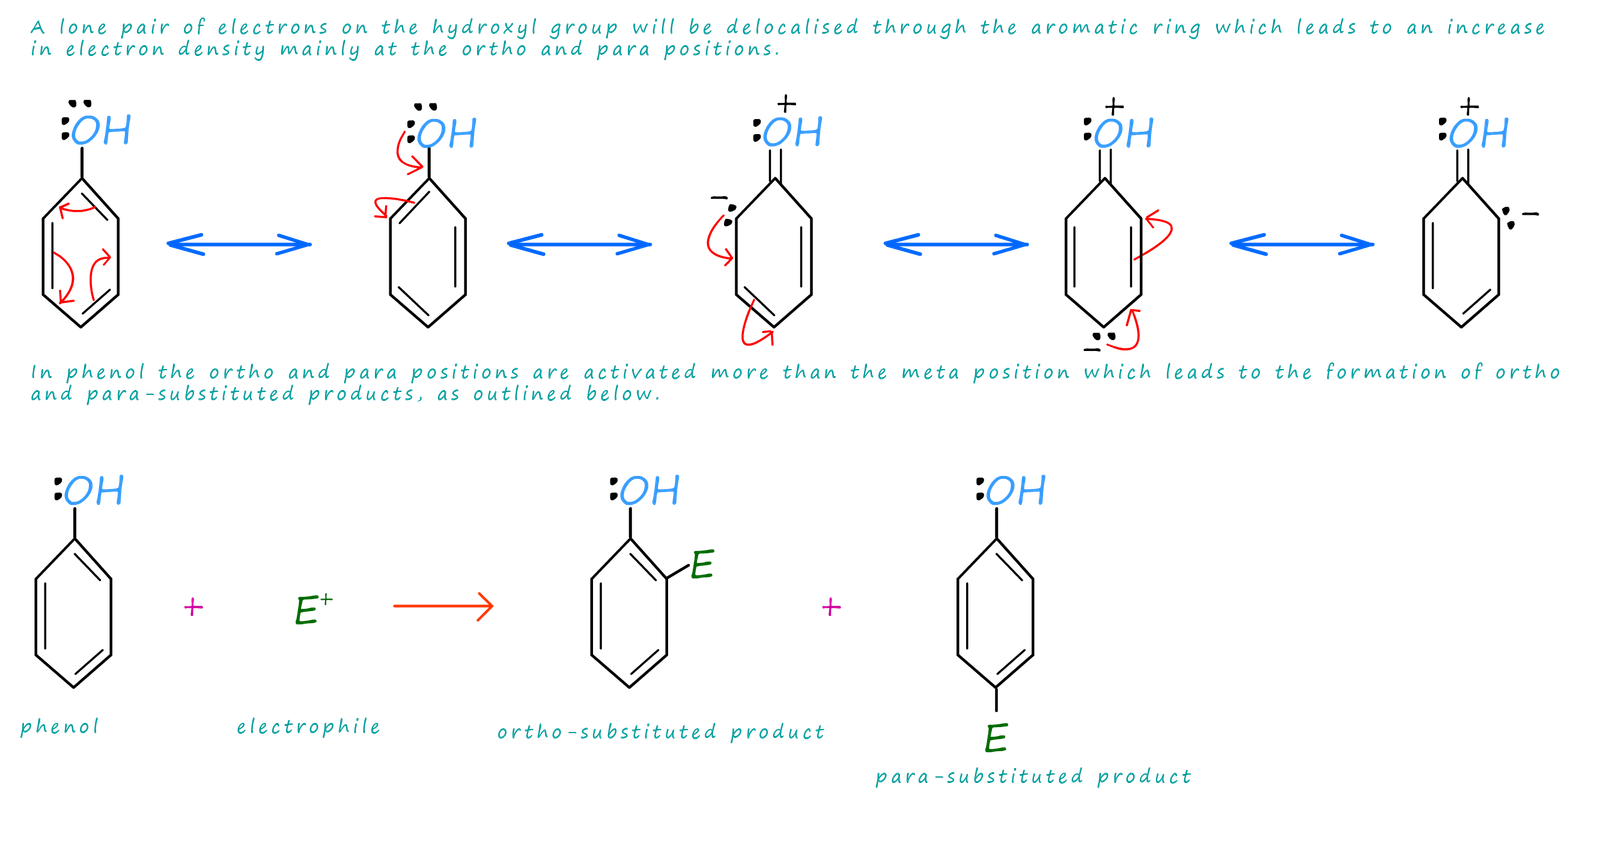 electrophilic substitution of phenol leads to mainly 
ortho and para products